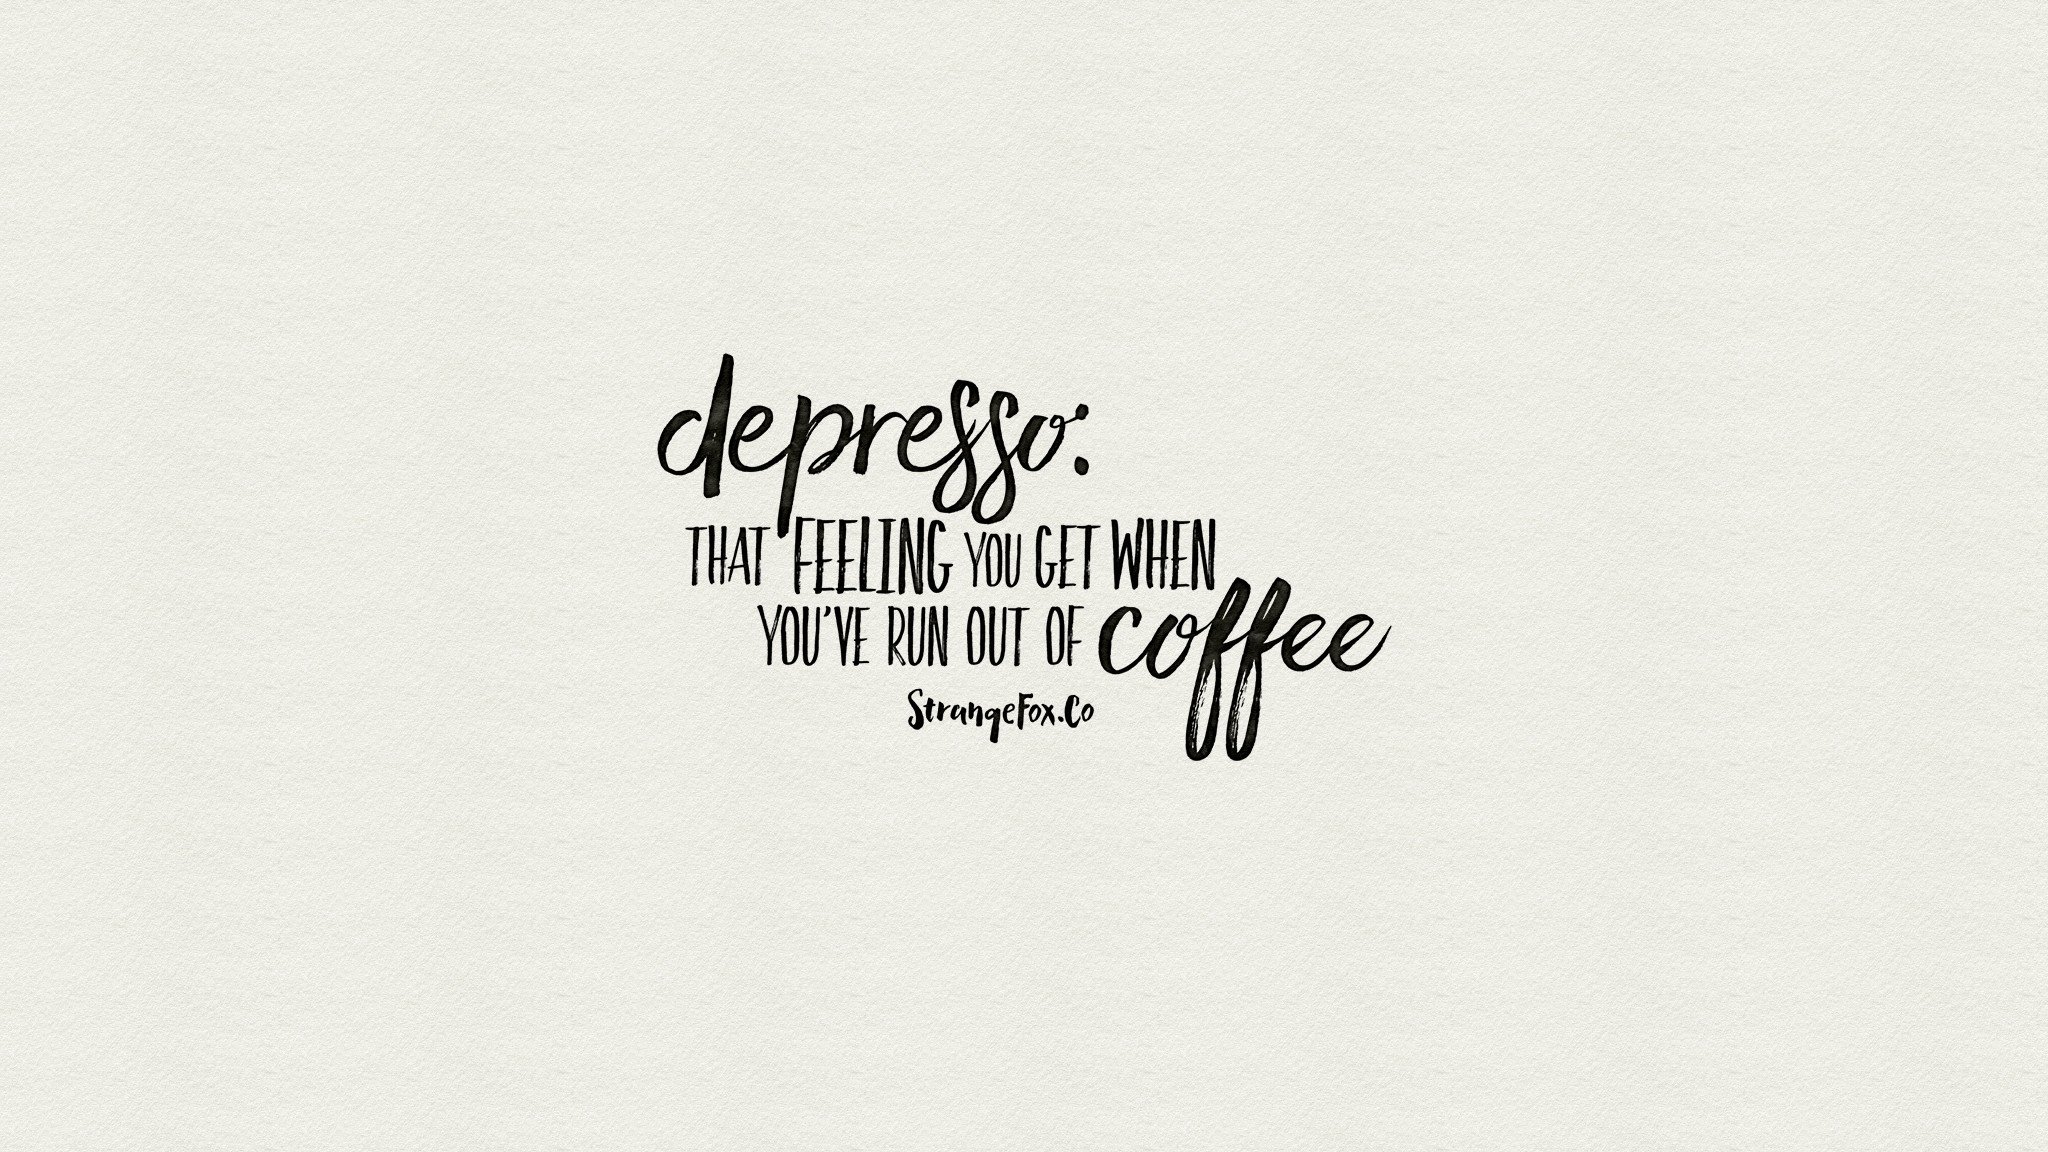 Depresso; that feeling when you've run out of coffee